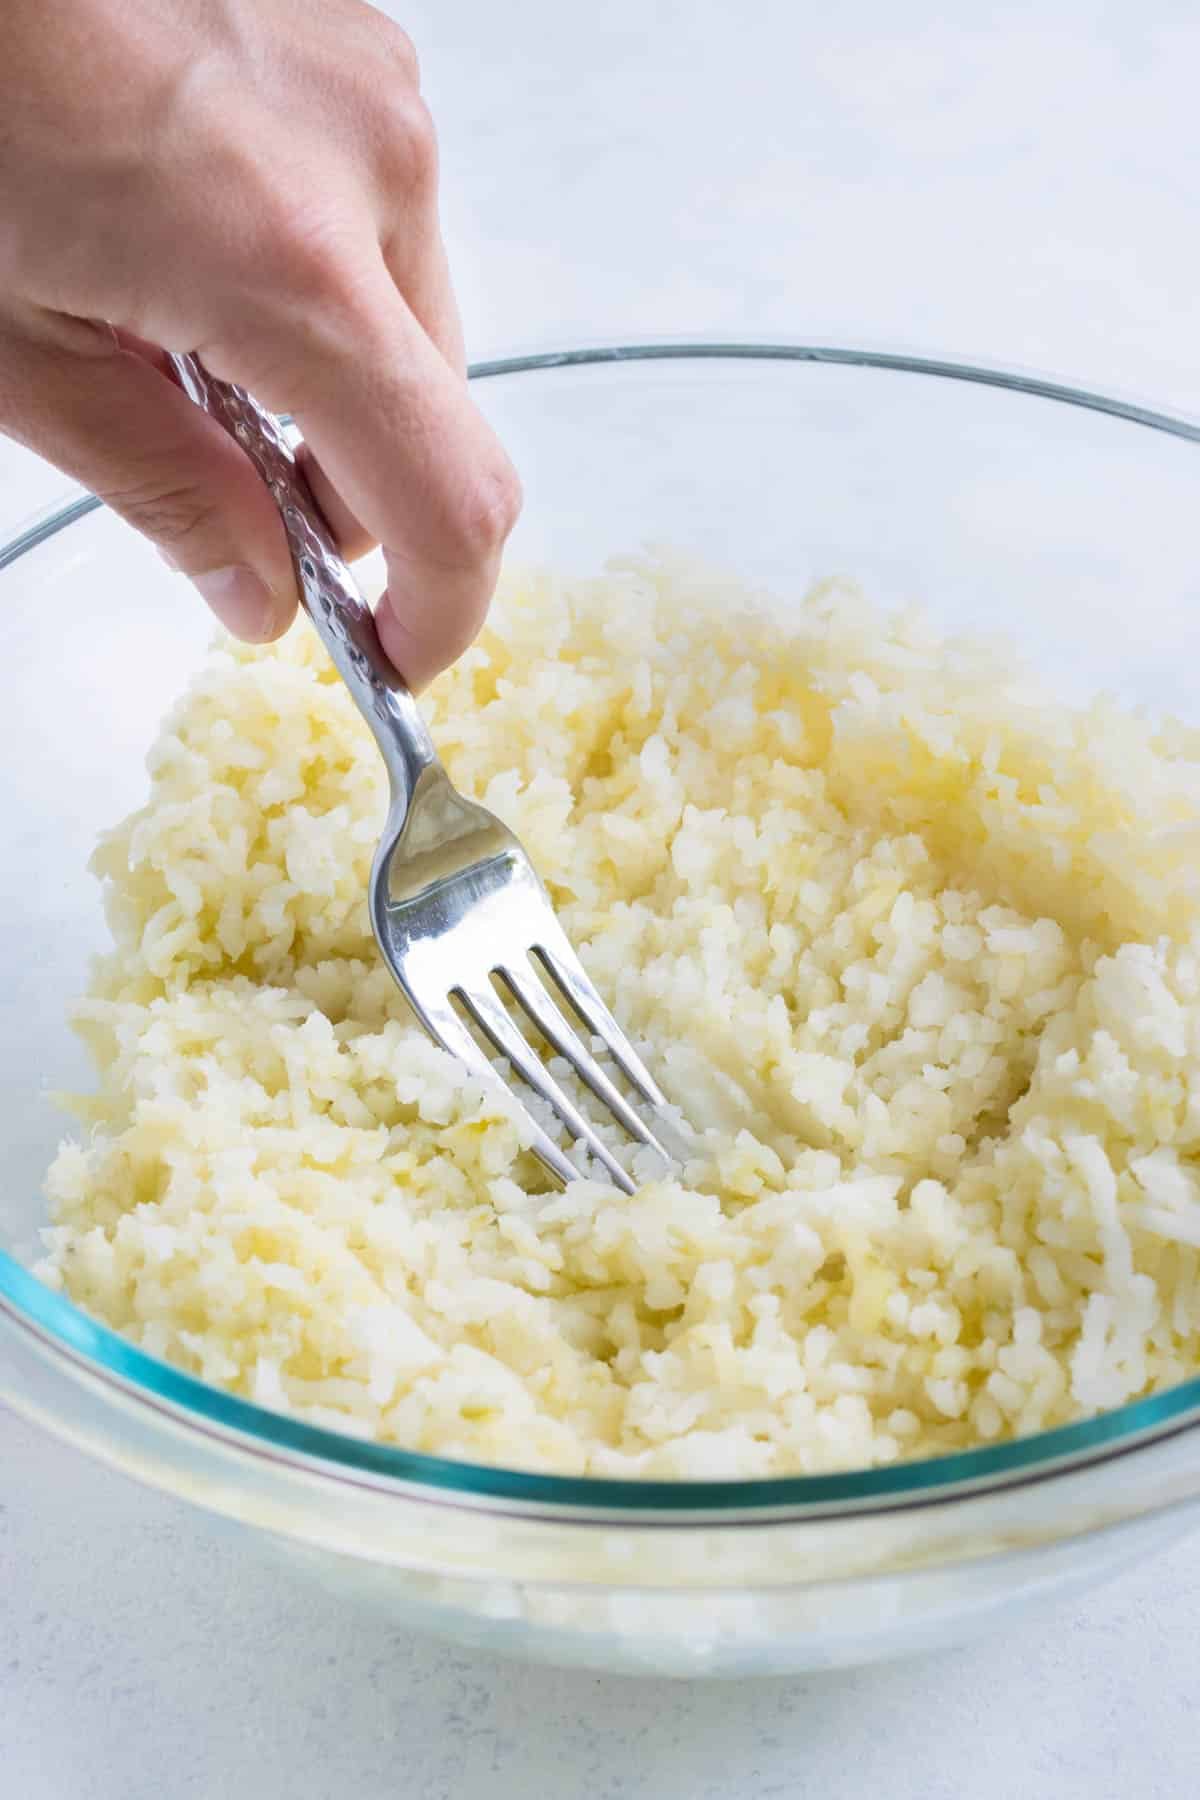 A fork can be used to mash the potatoes.